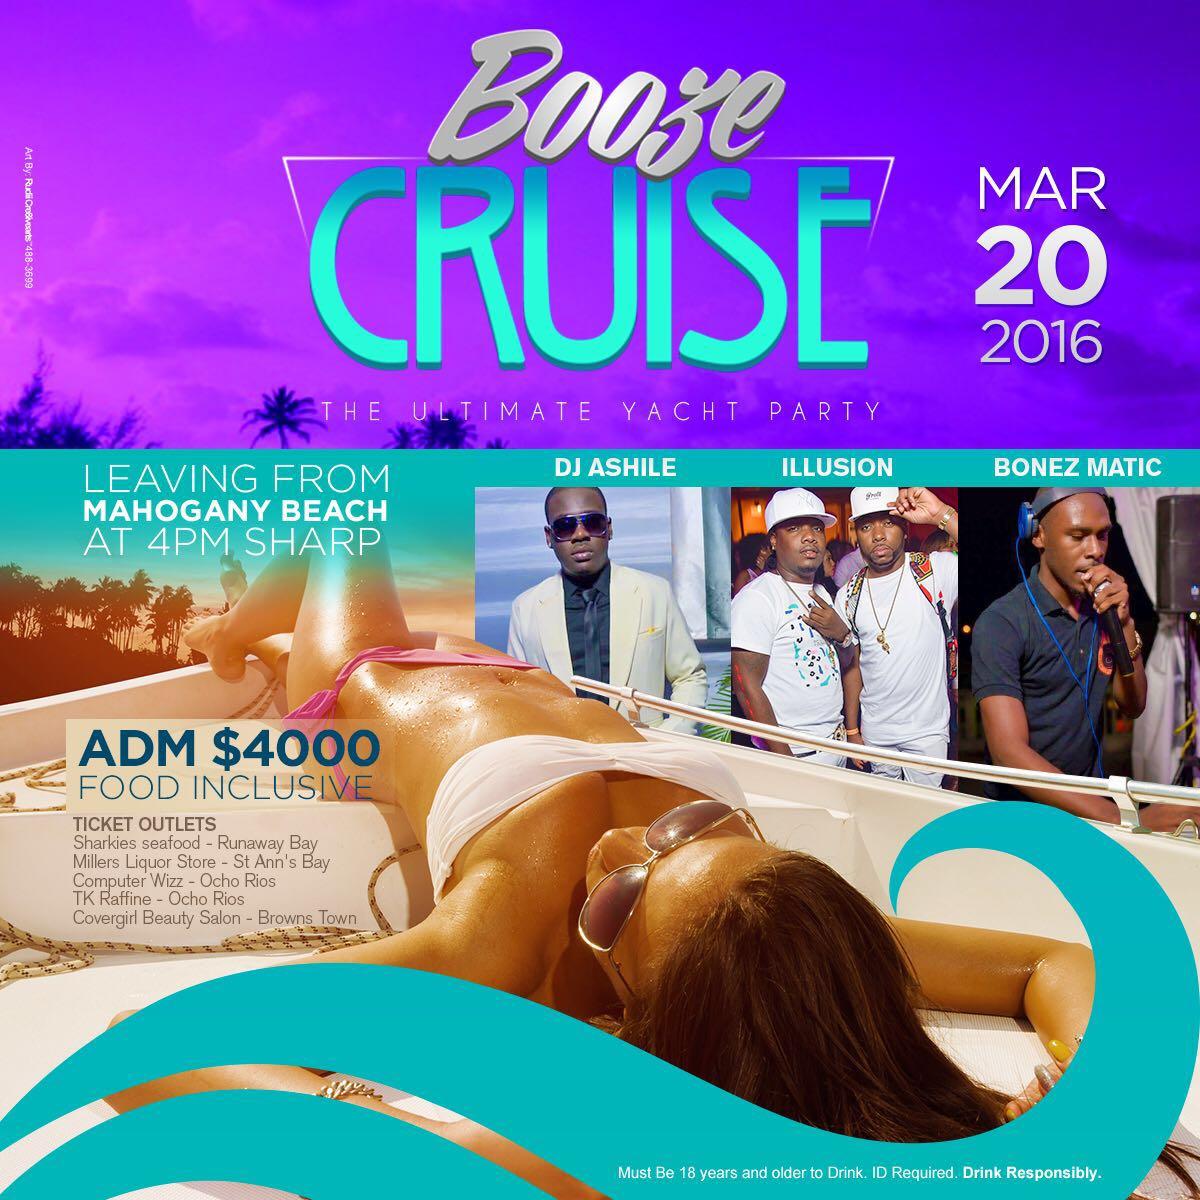 Booze Cruise "The Ultimate Yacht Party"